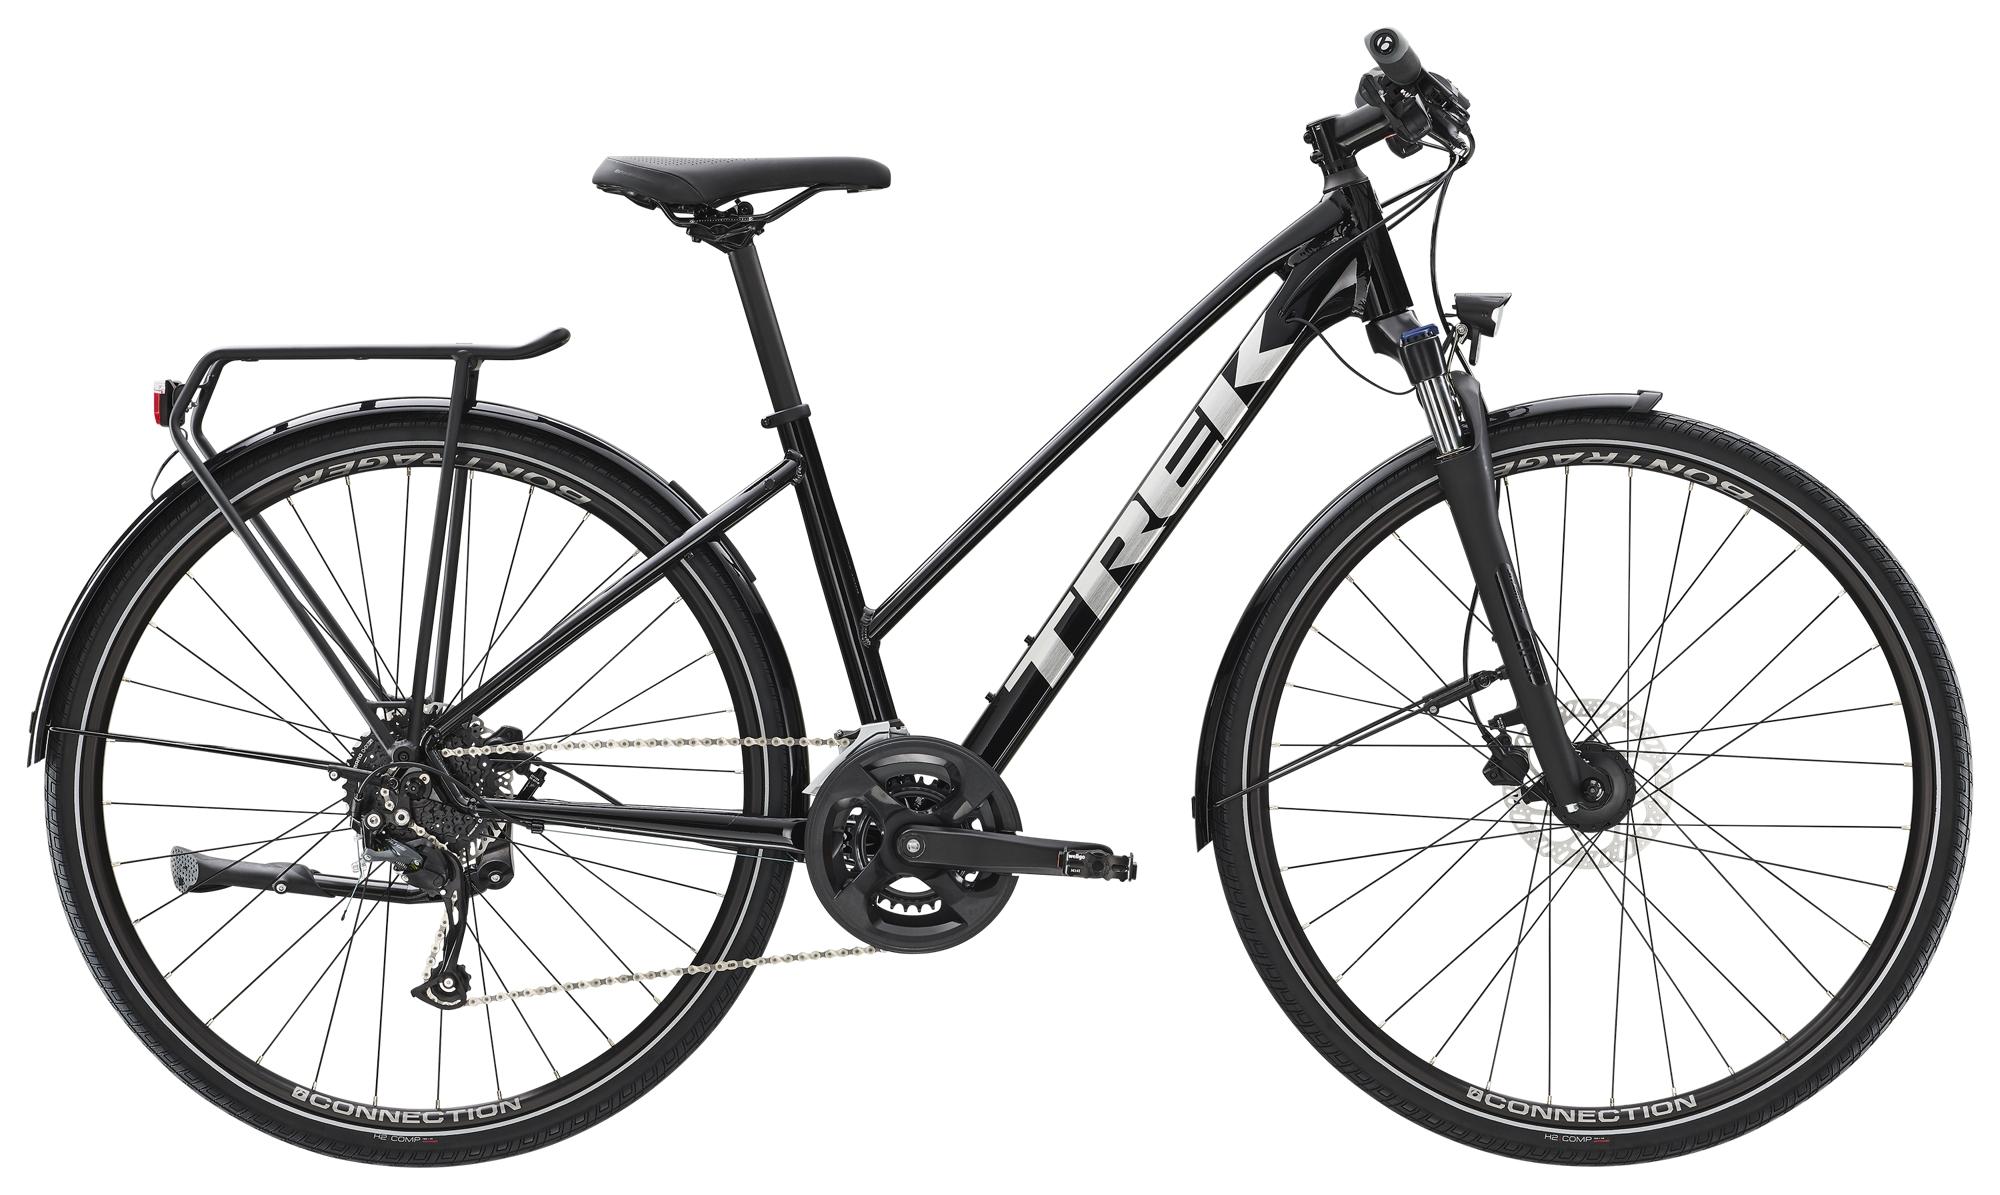 Trek Dual Sport 2 Equipped Stagger